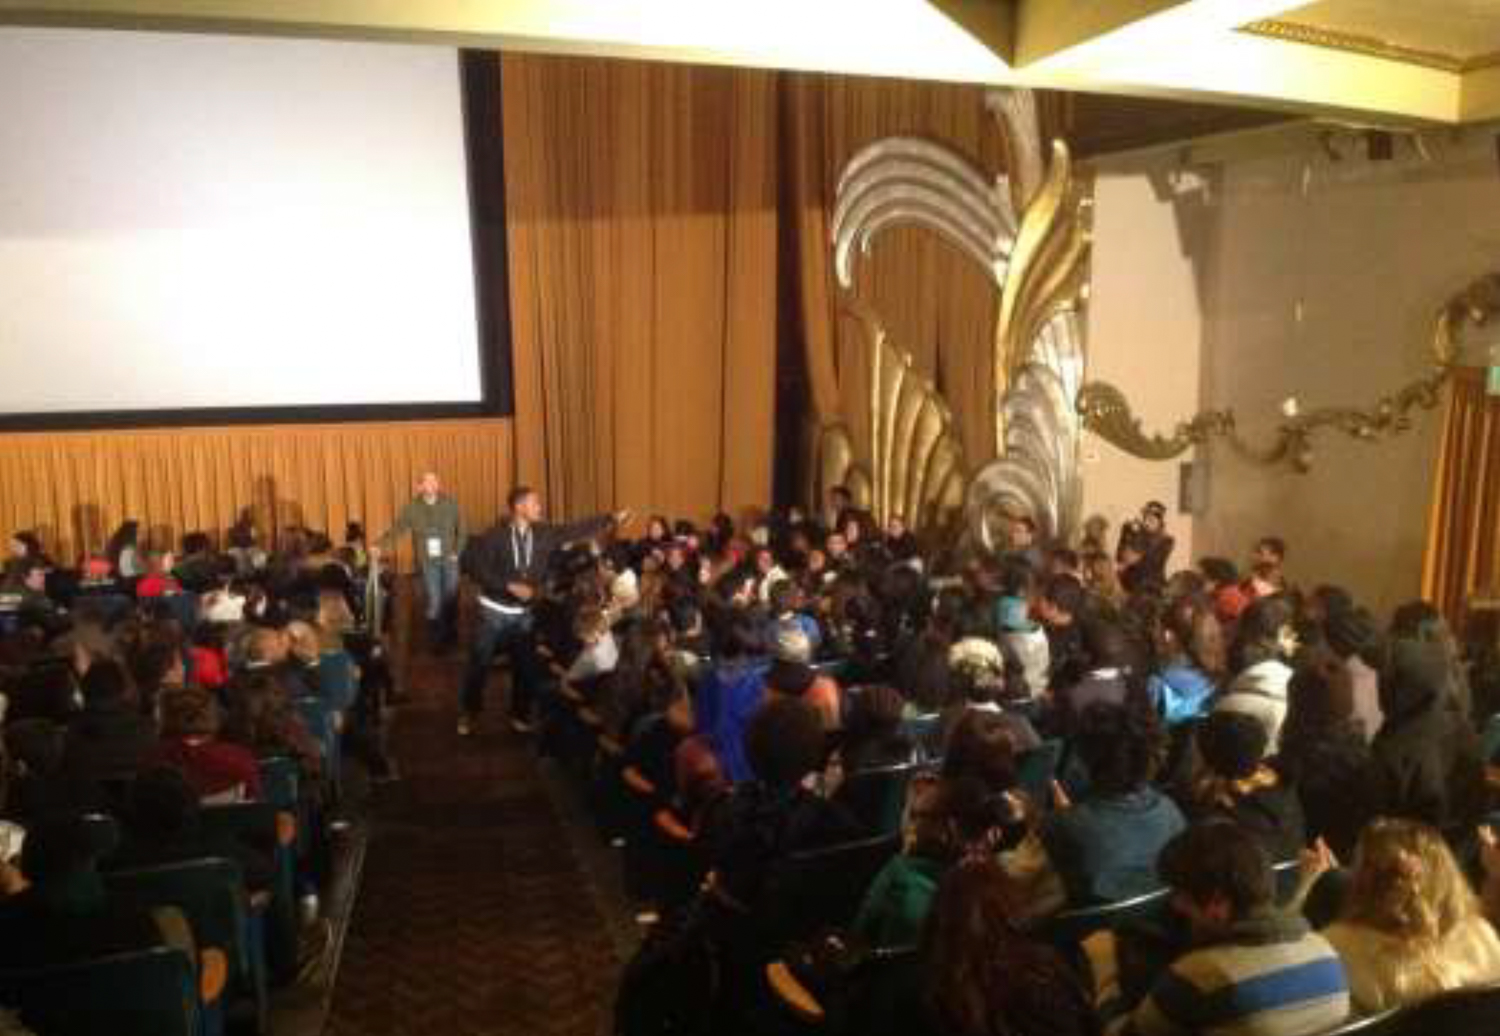 California Theatre audience for Ryan Coolger following a showing of 'Fruitvale Station' in 2013, image by Dale Sophiea via the Landmark Application